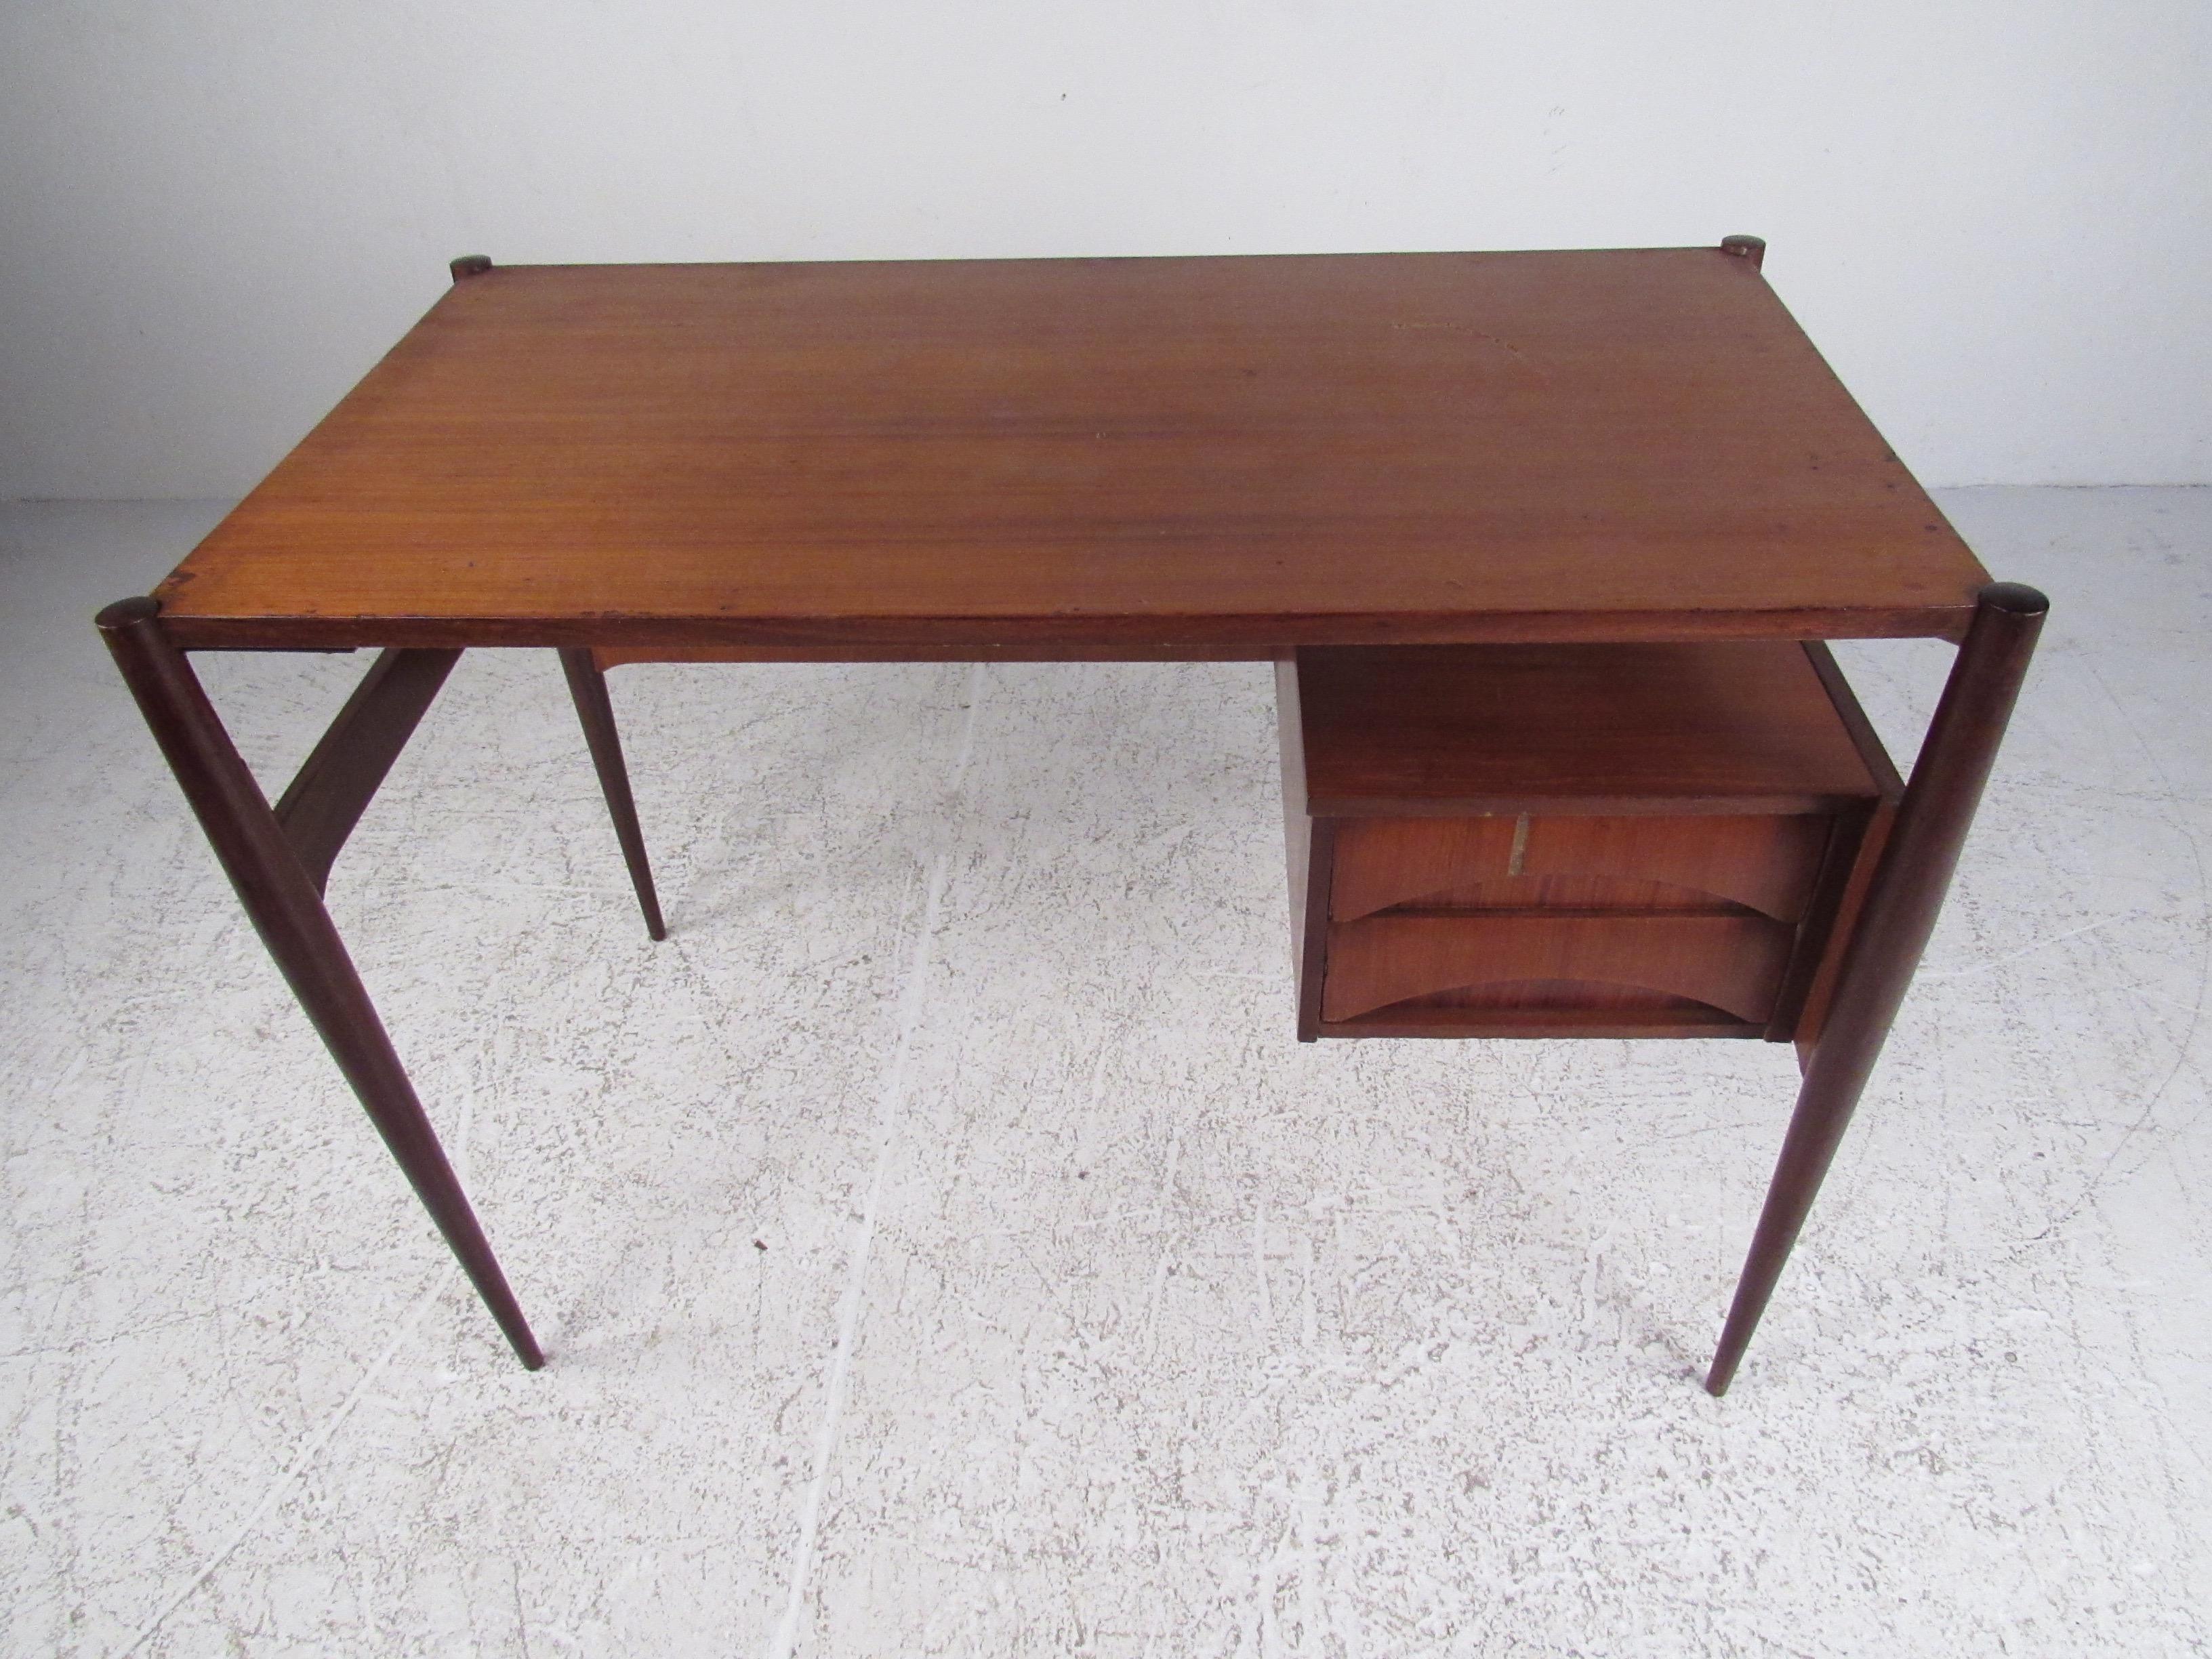 Beautiful two-layer Italian writing desk. This piece features abstract lines with full functionality. It brings a minimalist approach to office design while maintaining full practicality. This is a beautiful piece for any modern space. Please